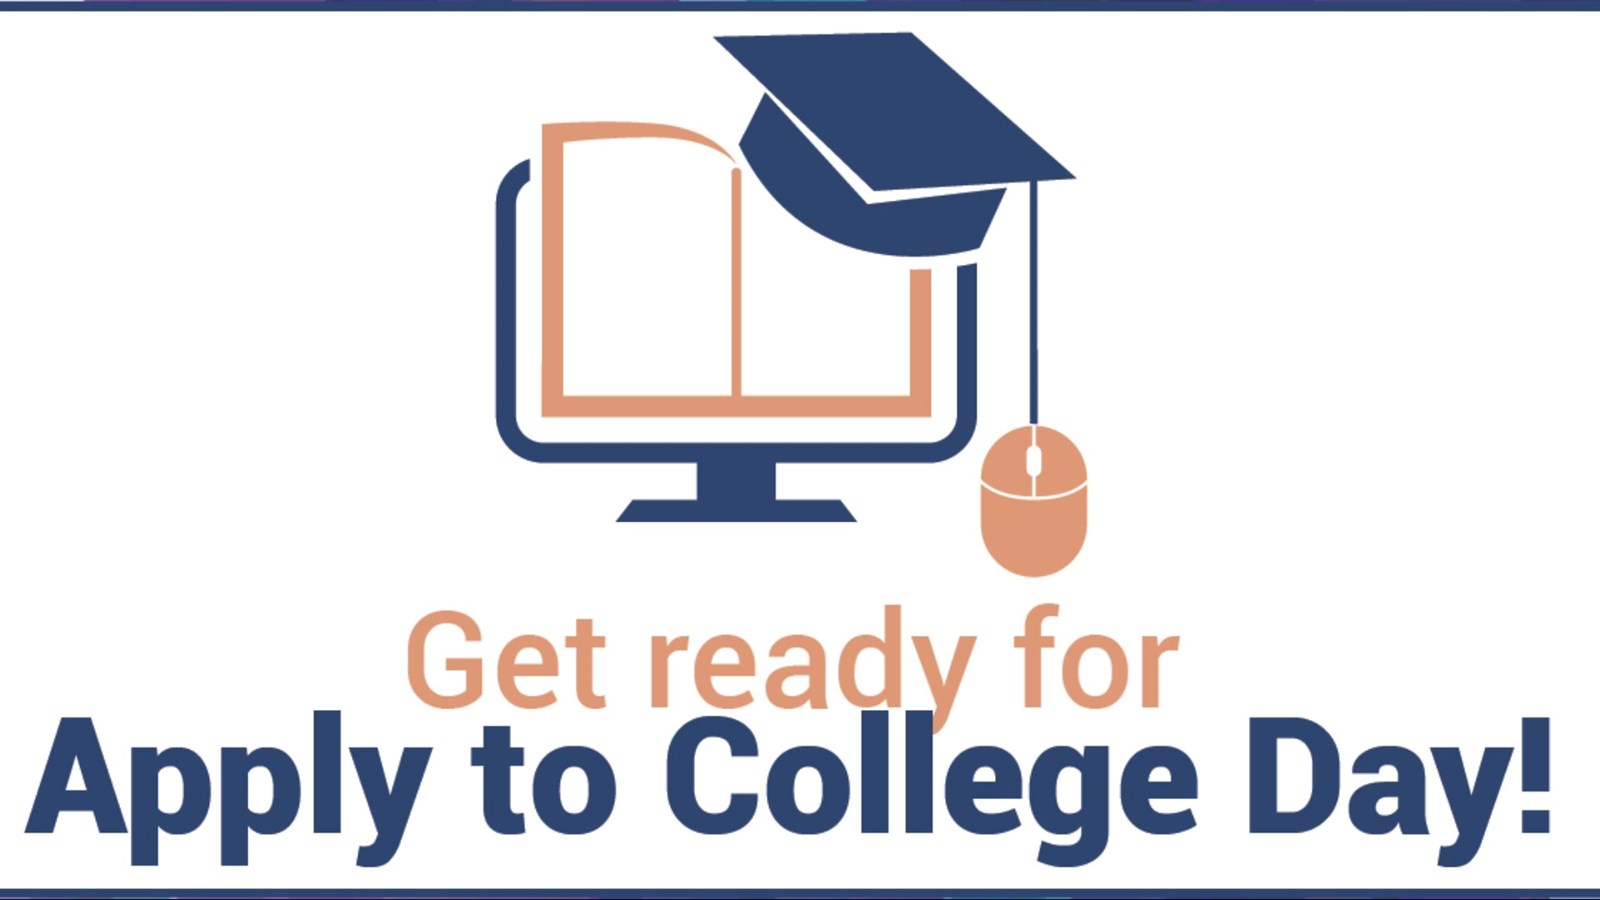 Apply to College Day